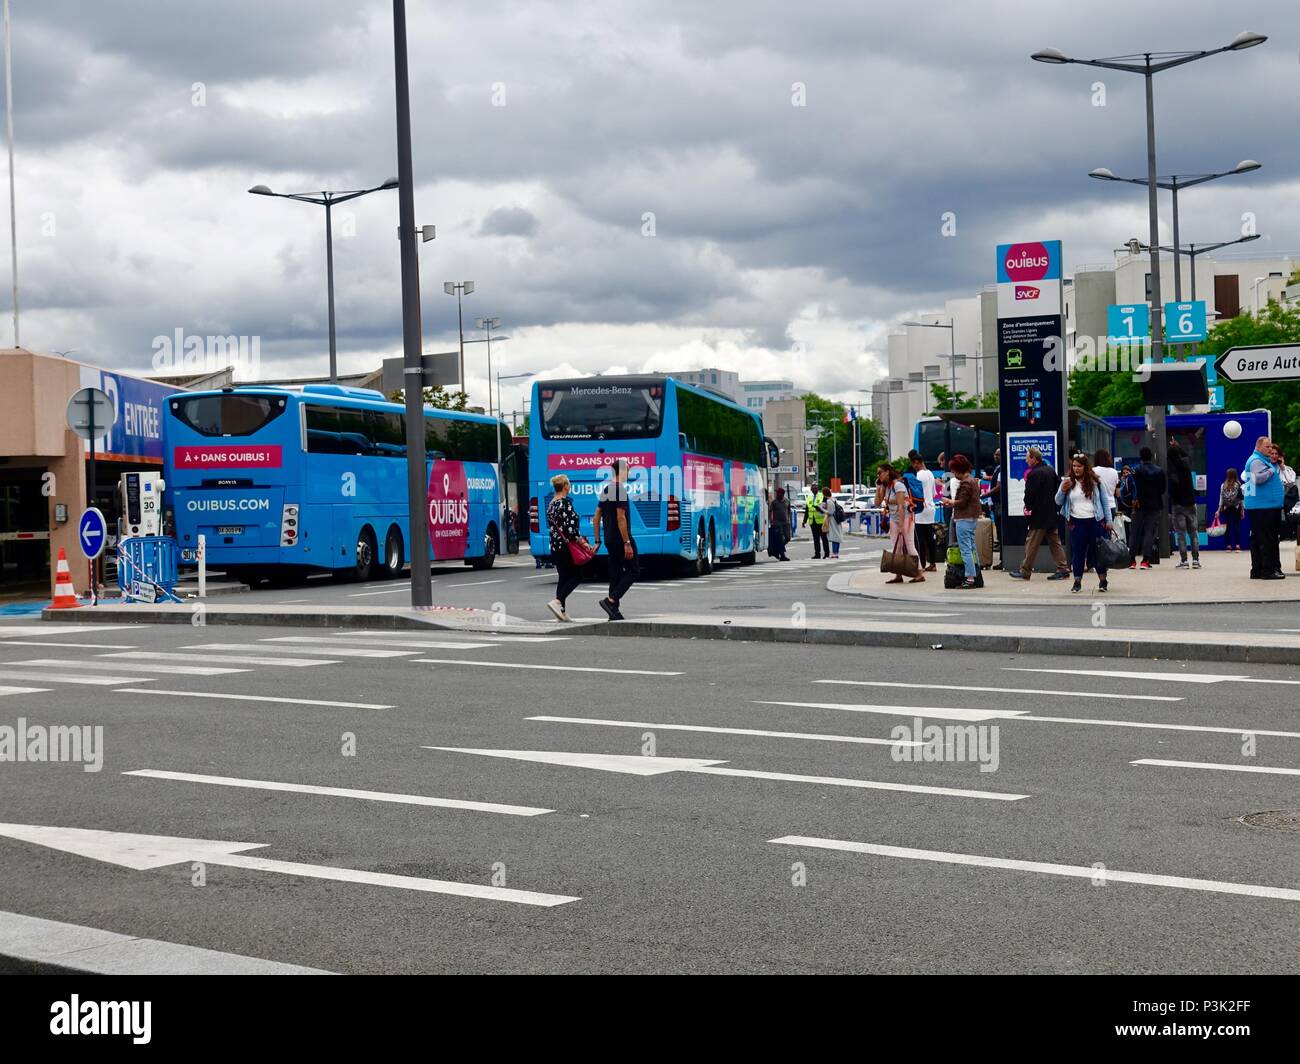 More people taking buses due to striking train workers. Buses lined up outside Gare de Bercy, the Bercy train and Oui bus station, Paris, France. Stock Photo